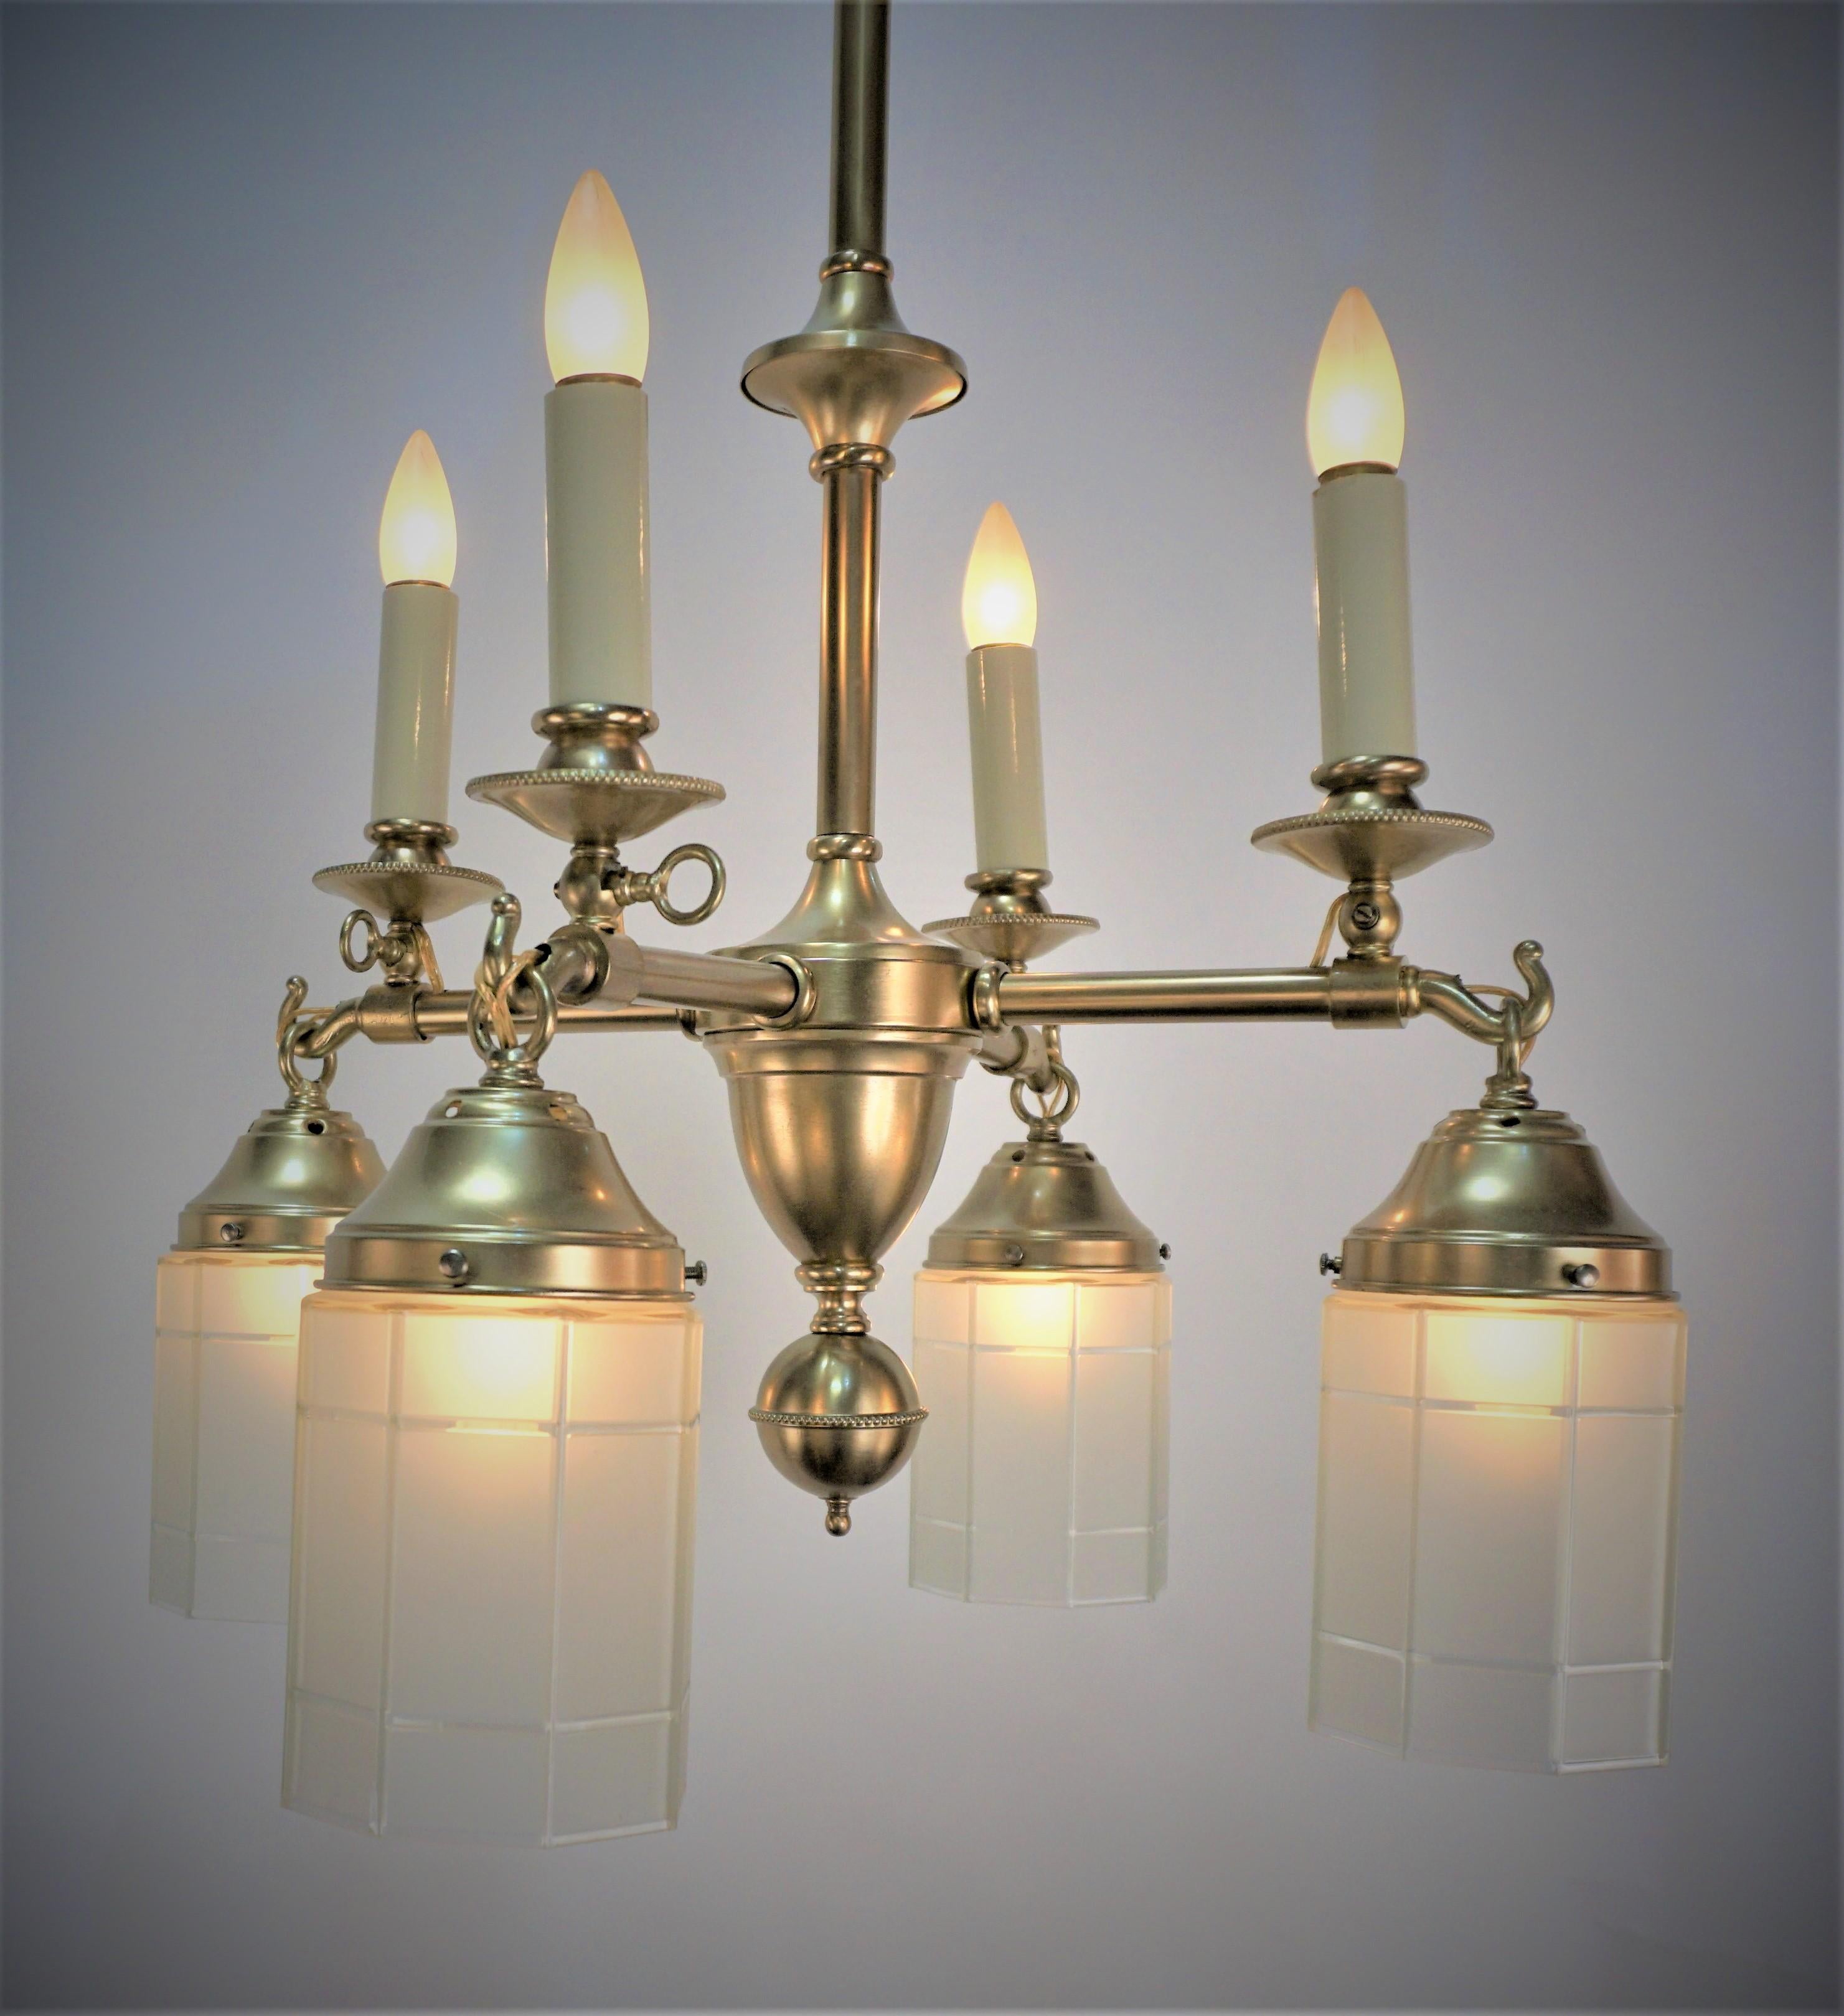 Mission, Arts & crafts early 20th century American four gas and four electrical brass chandelier.
Professionally rewired and ready for installation.